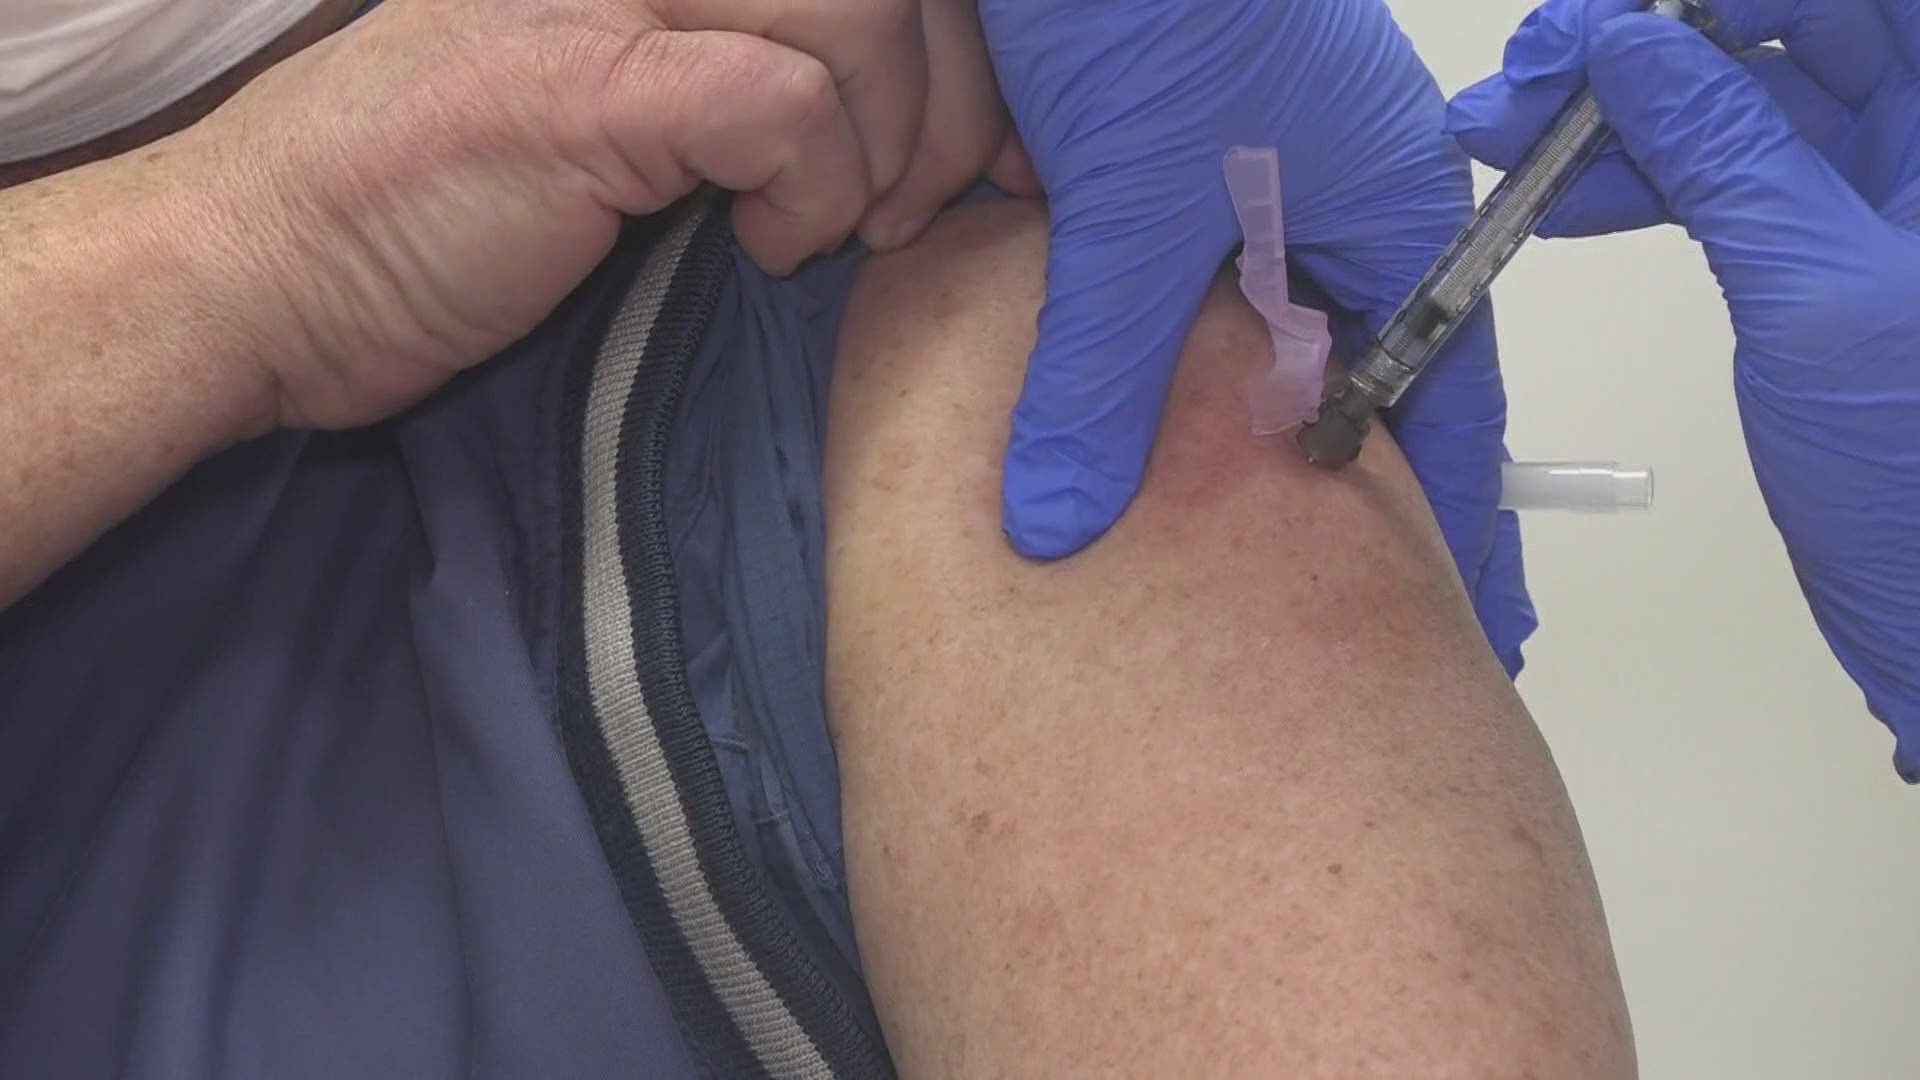 Thousands of Mainers are still eagerly awaiting their first dose of the vaccine.